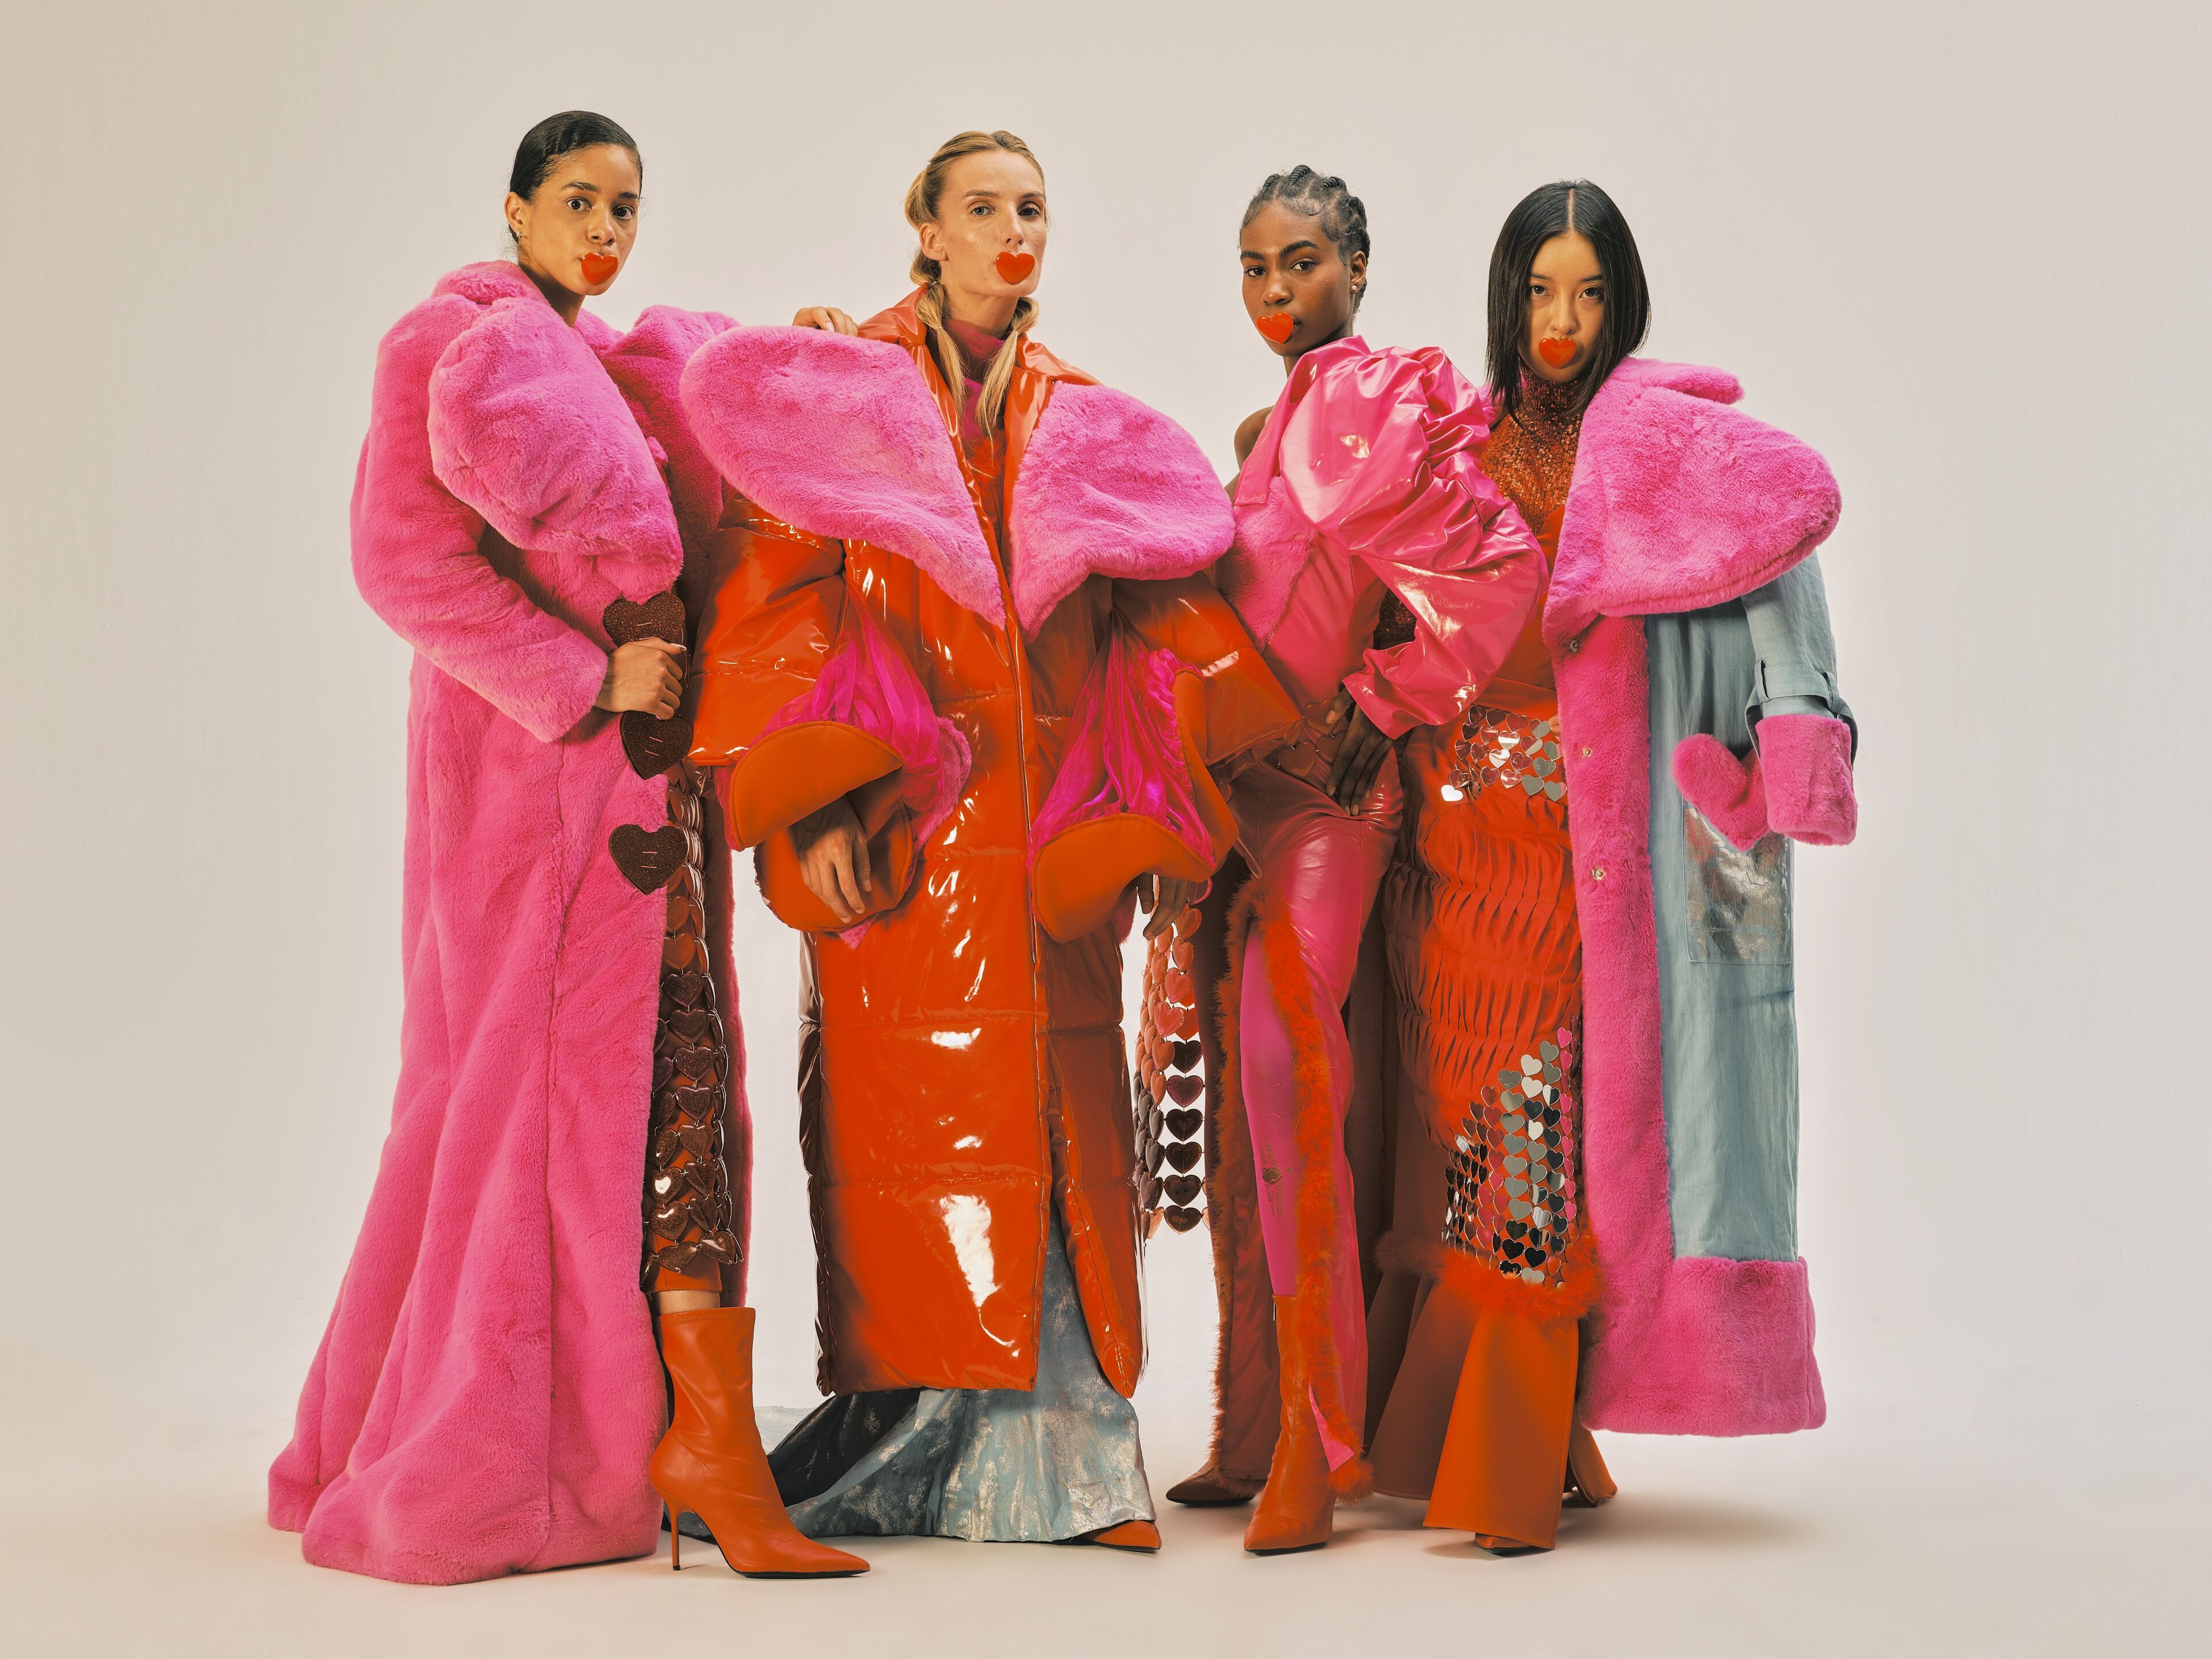 Four models striking a pose in bold, colorful outerwear with a mix of textures.